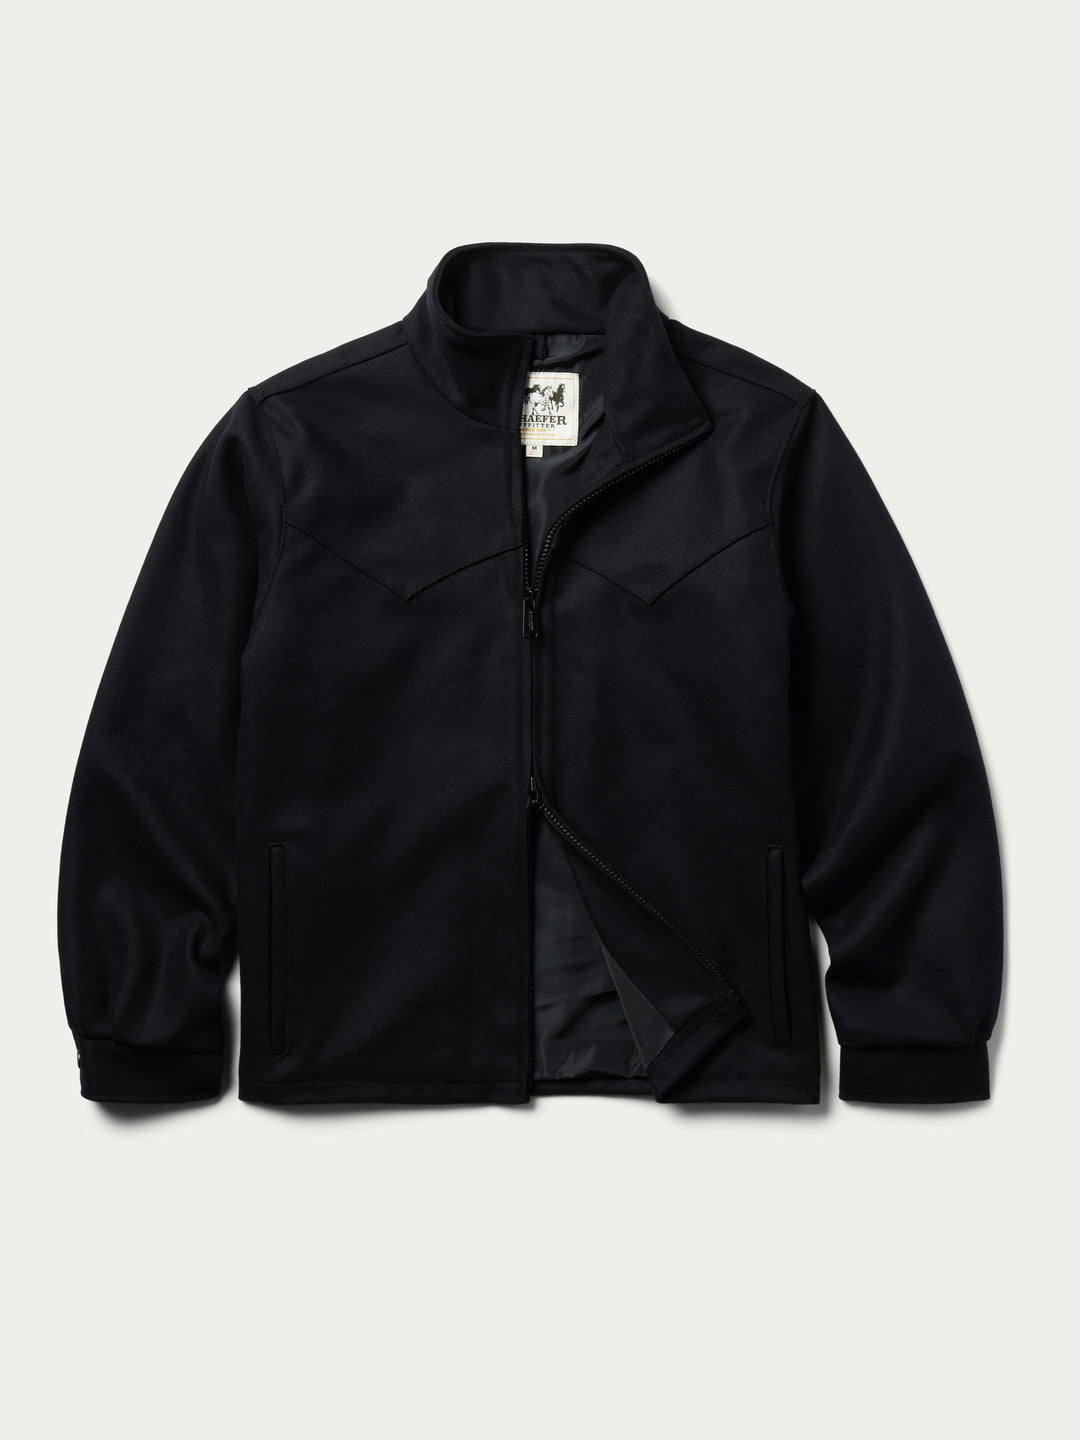 Wool Arena Jacket - Schaefer Outfitter